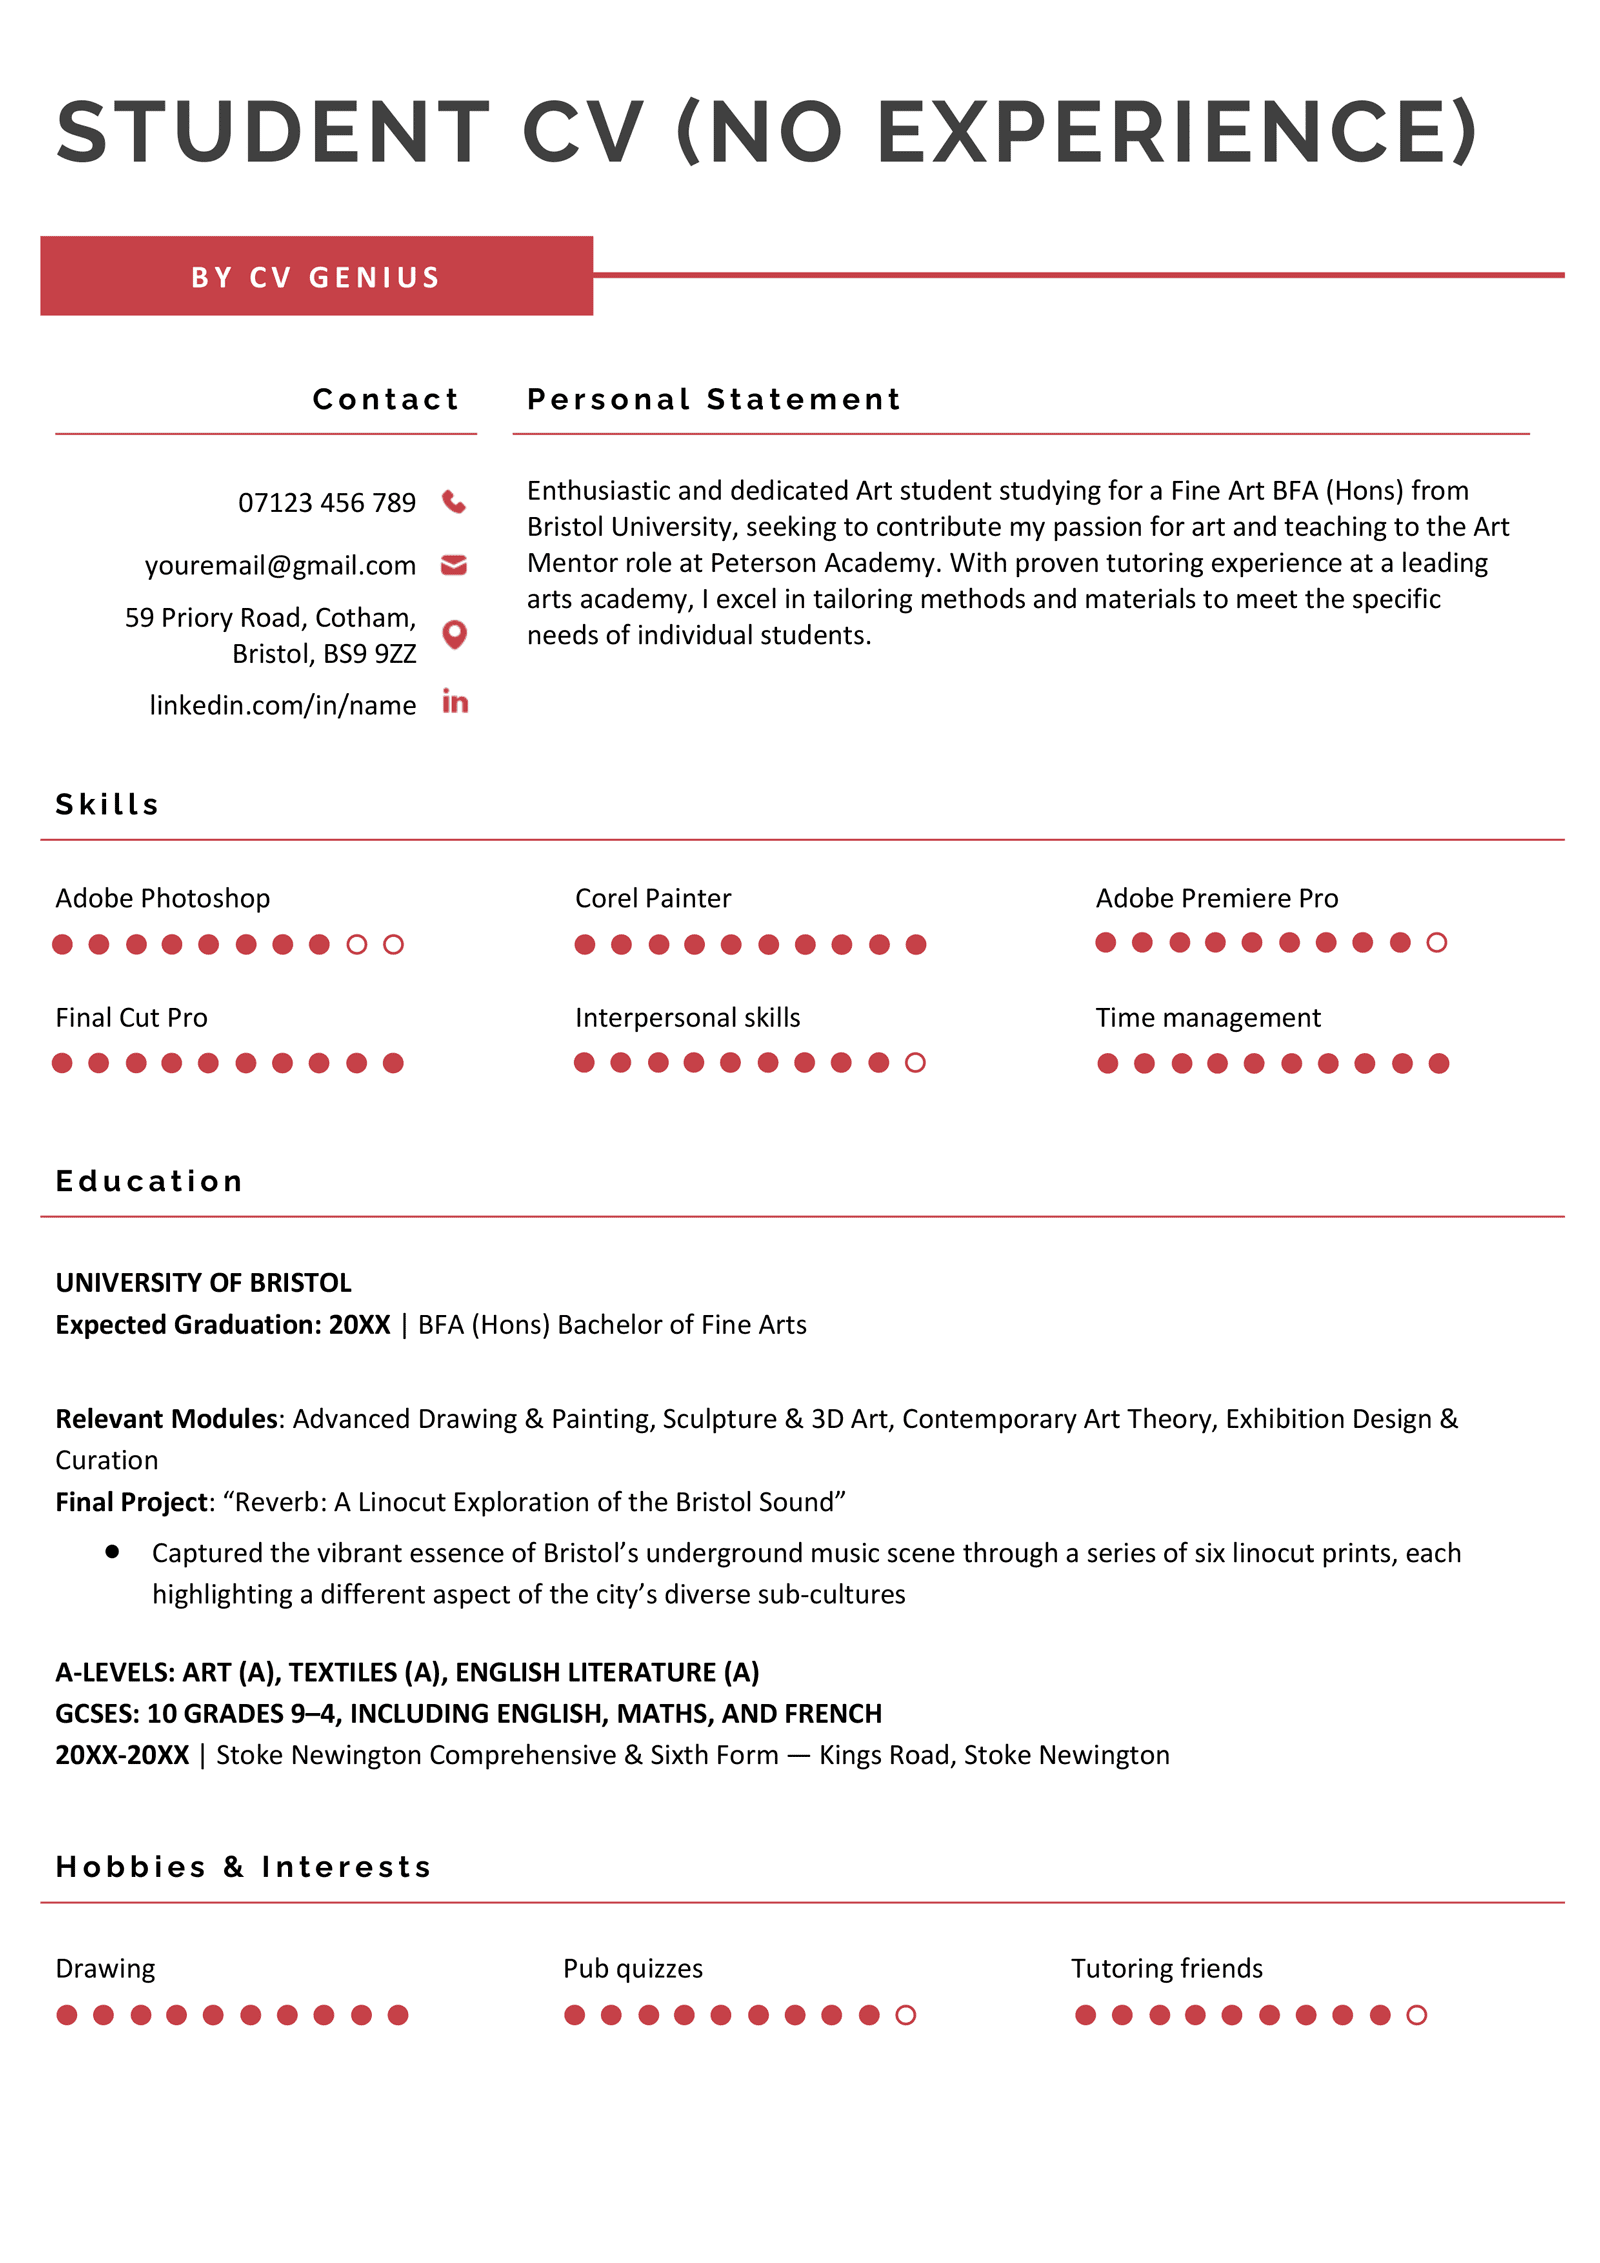 A CV for a student without any work experience that instead describes their skills, education, and hobbies and interests.